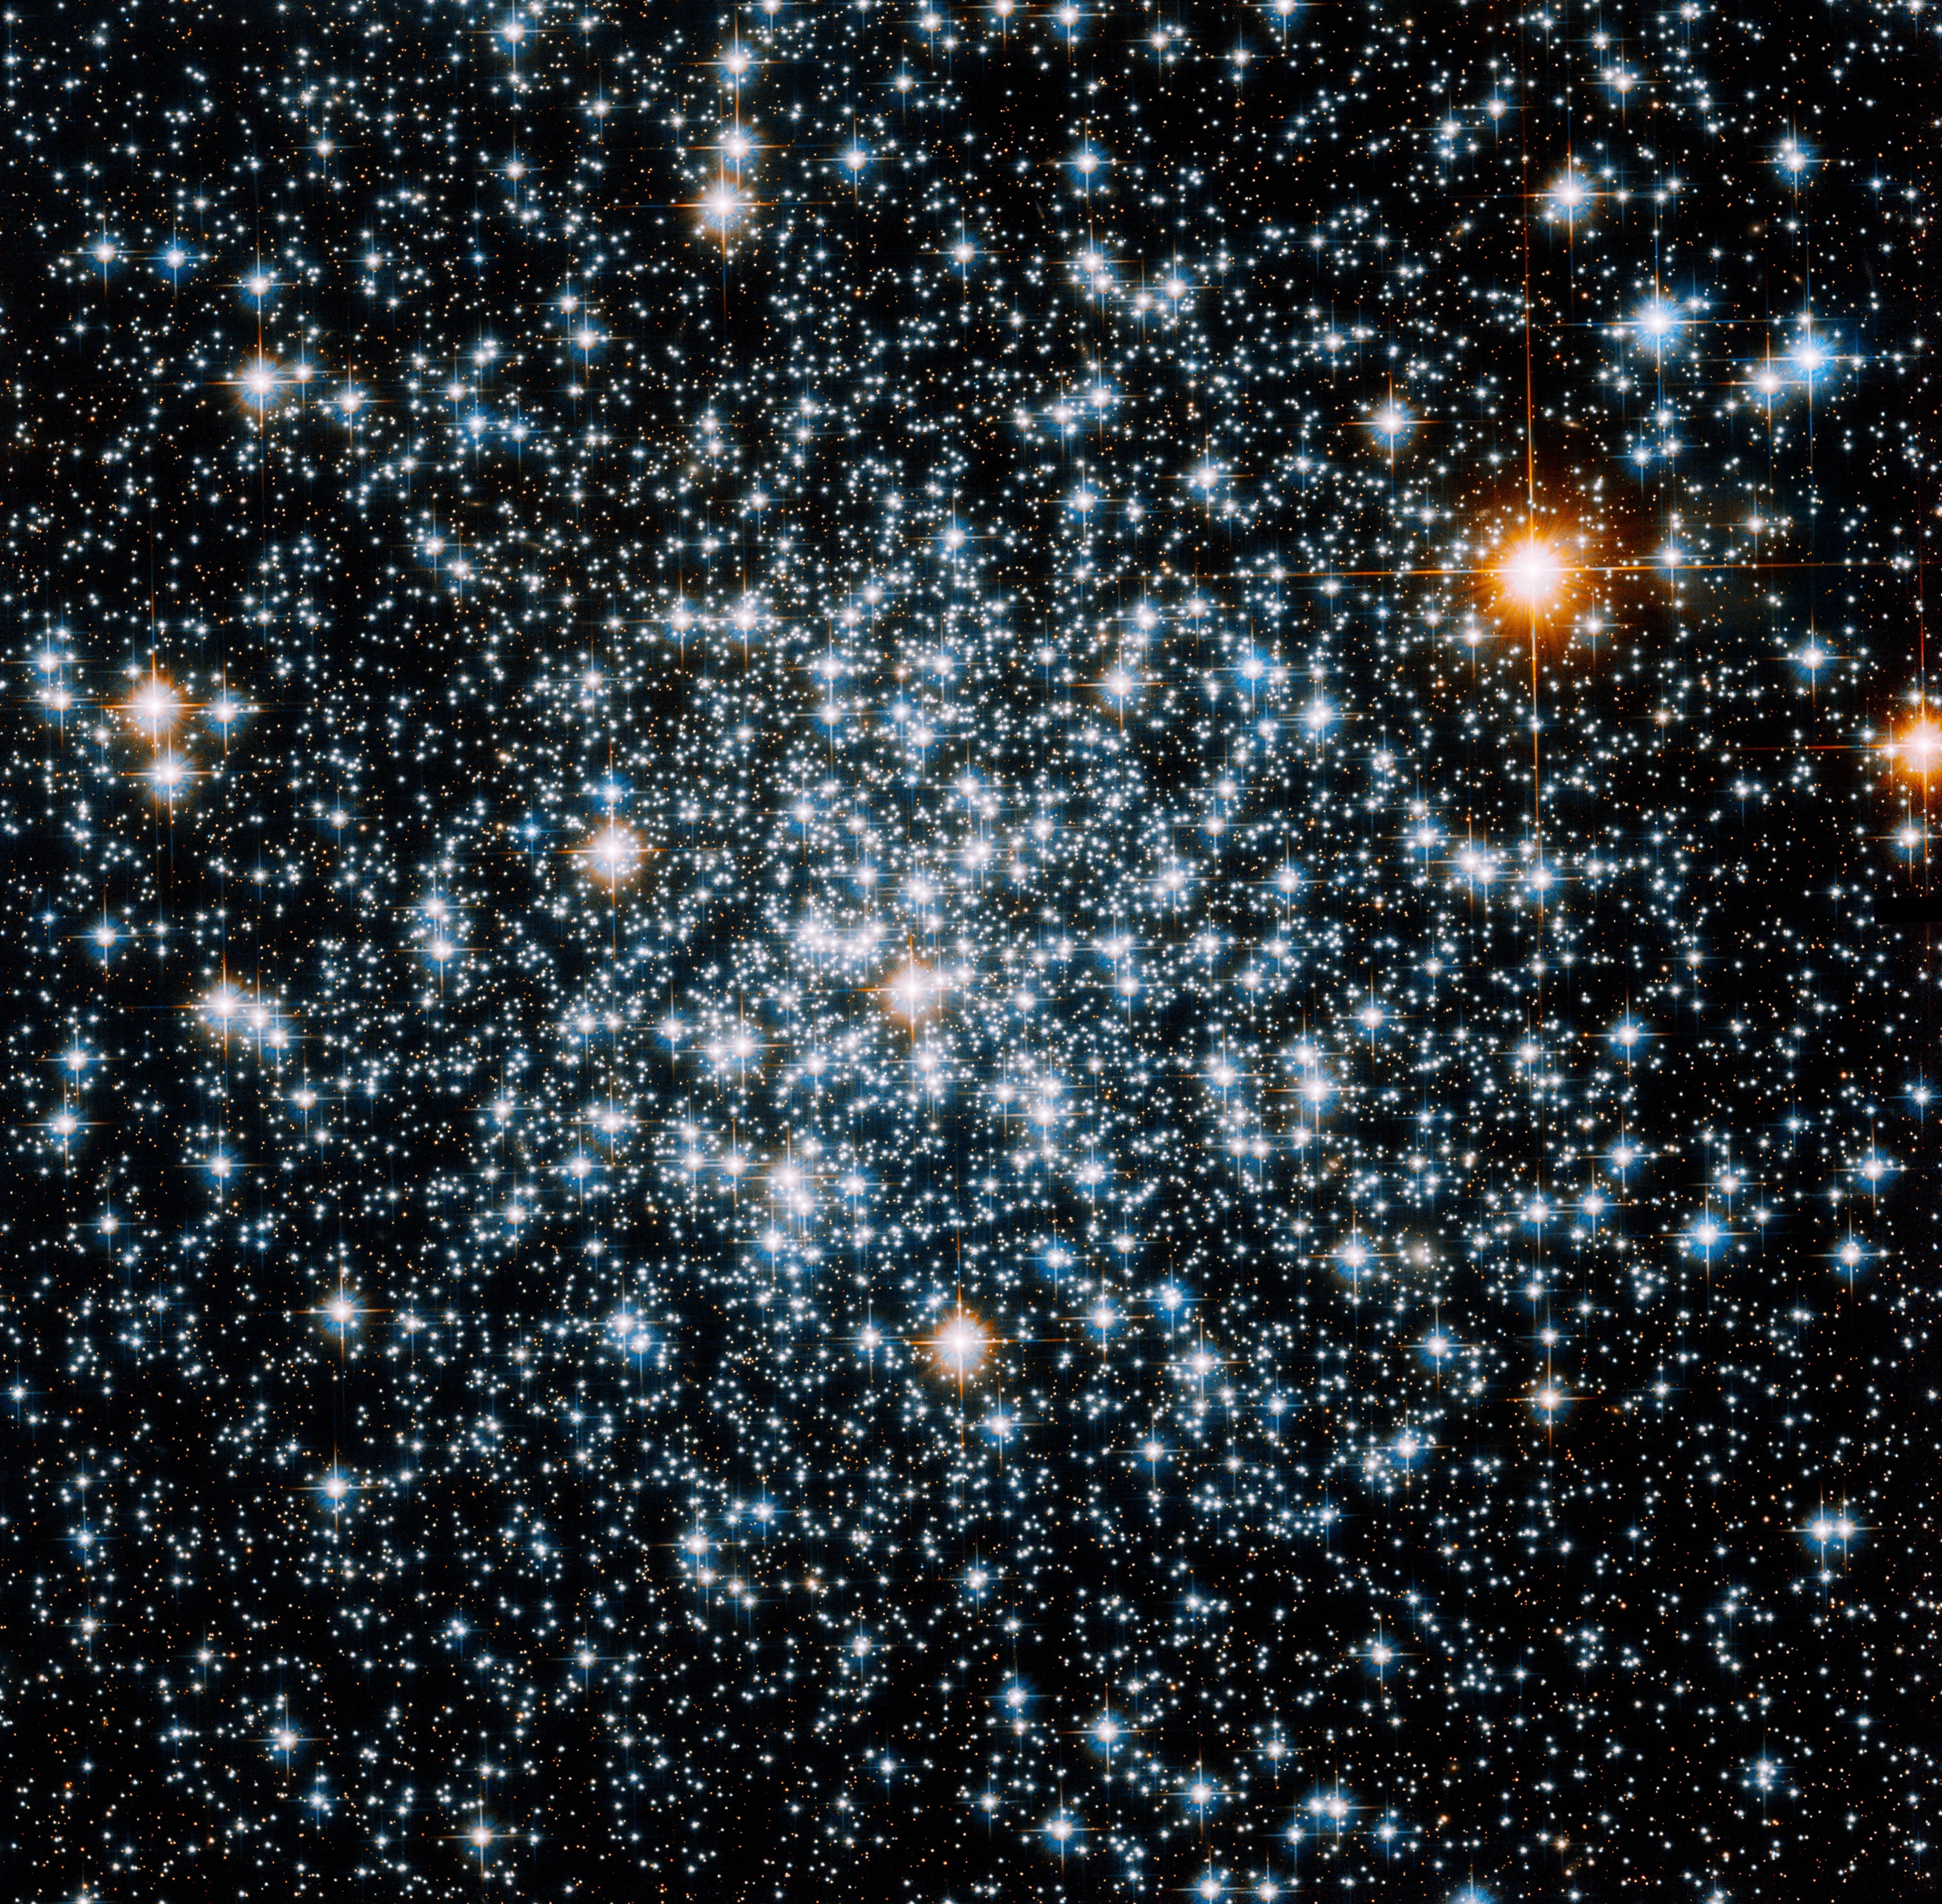 A grouping of mostly blue and white stars with two bright red stars to the right.